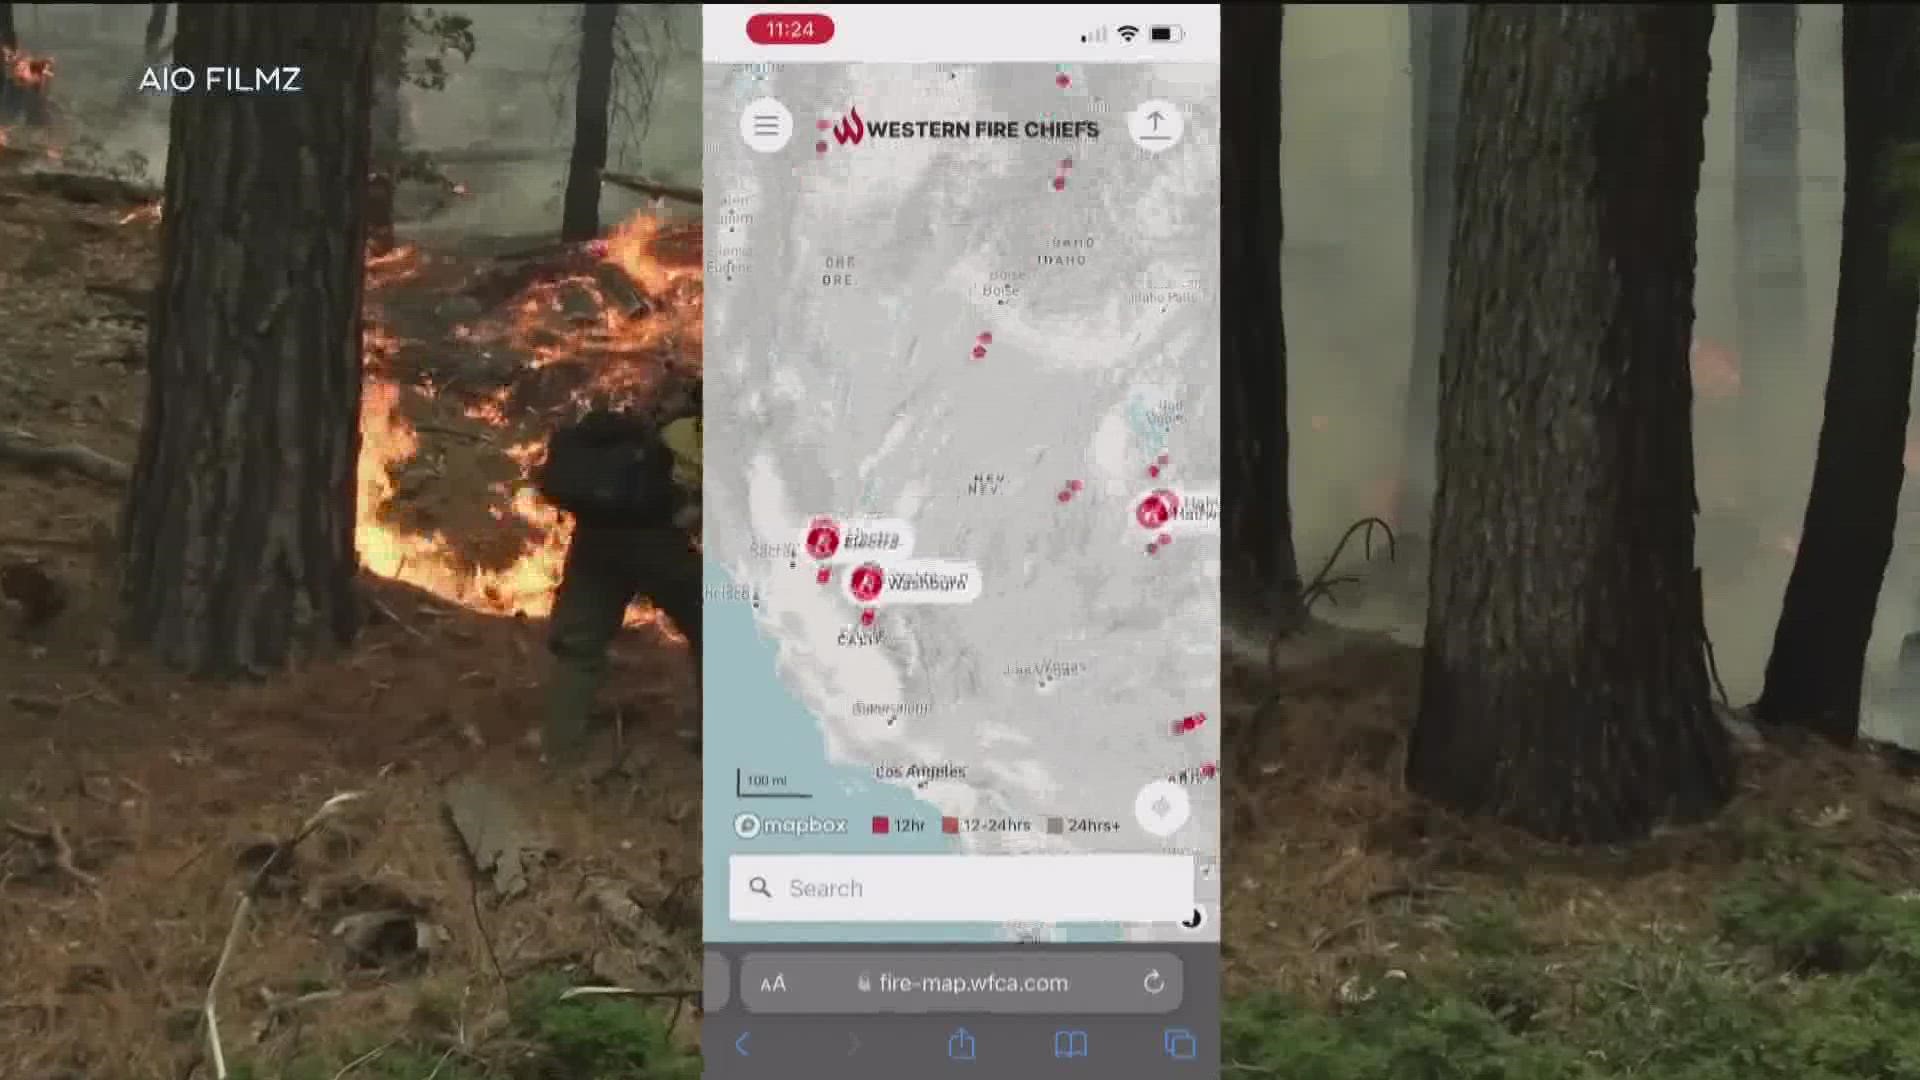 The Western Fire Chiefs Association is introducing this fire map to provide near real time information about active wildfires.